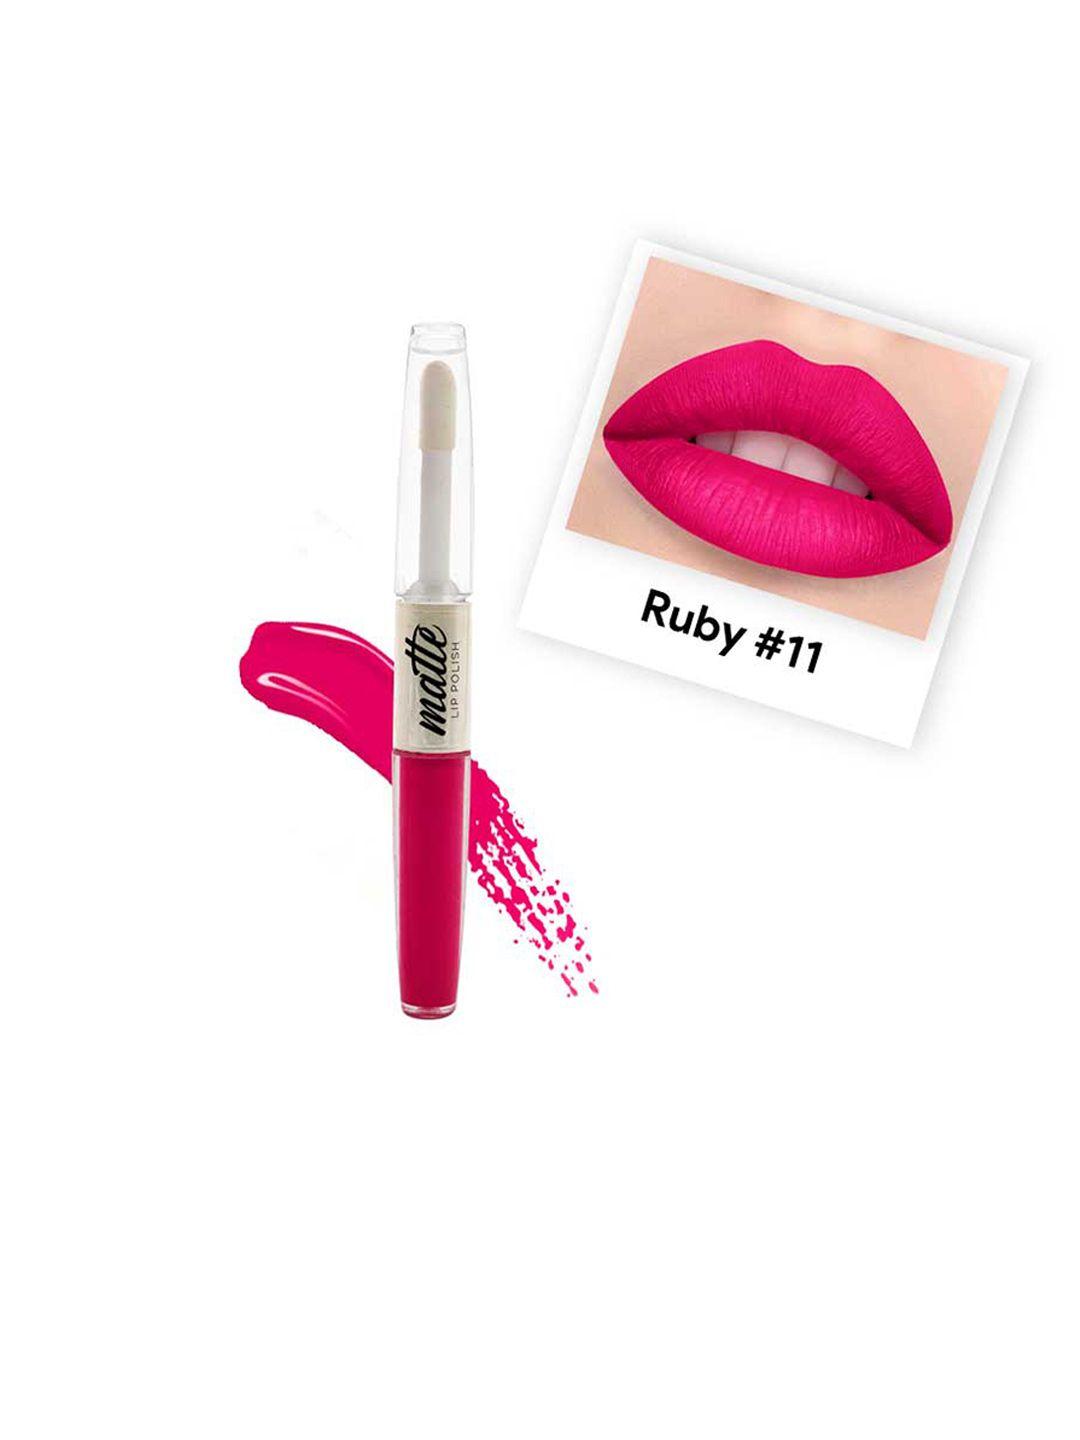 beautyrelay london marker 24 hours comfortable color 2 in 1 matte lipstick 5g - ruby 11